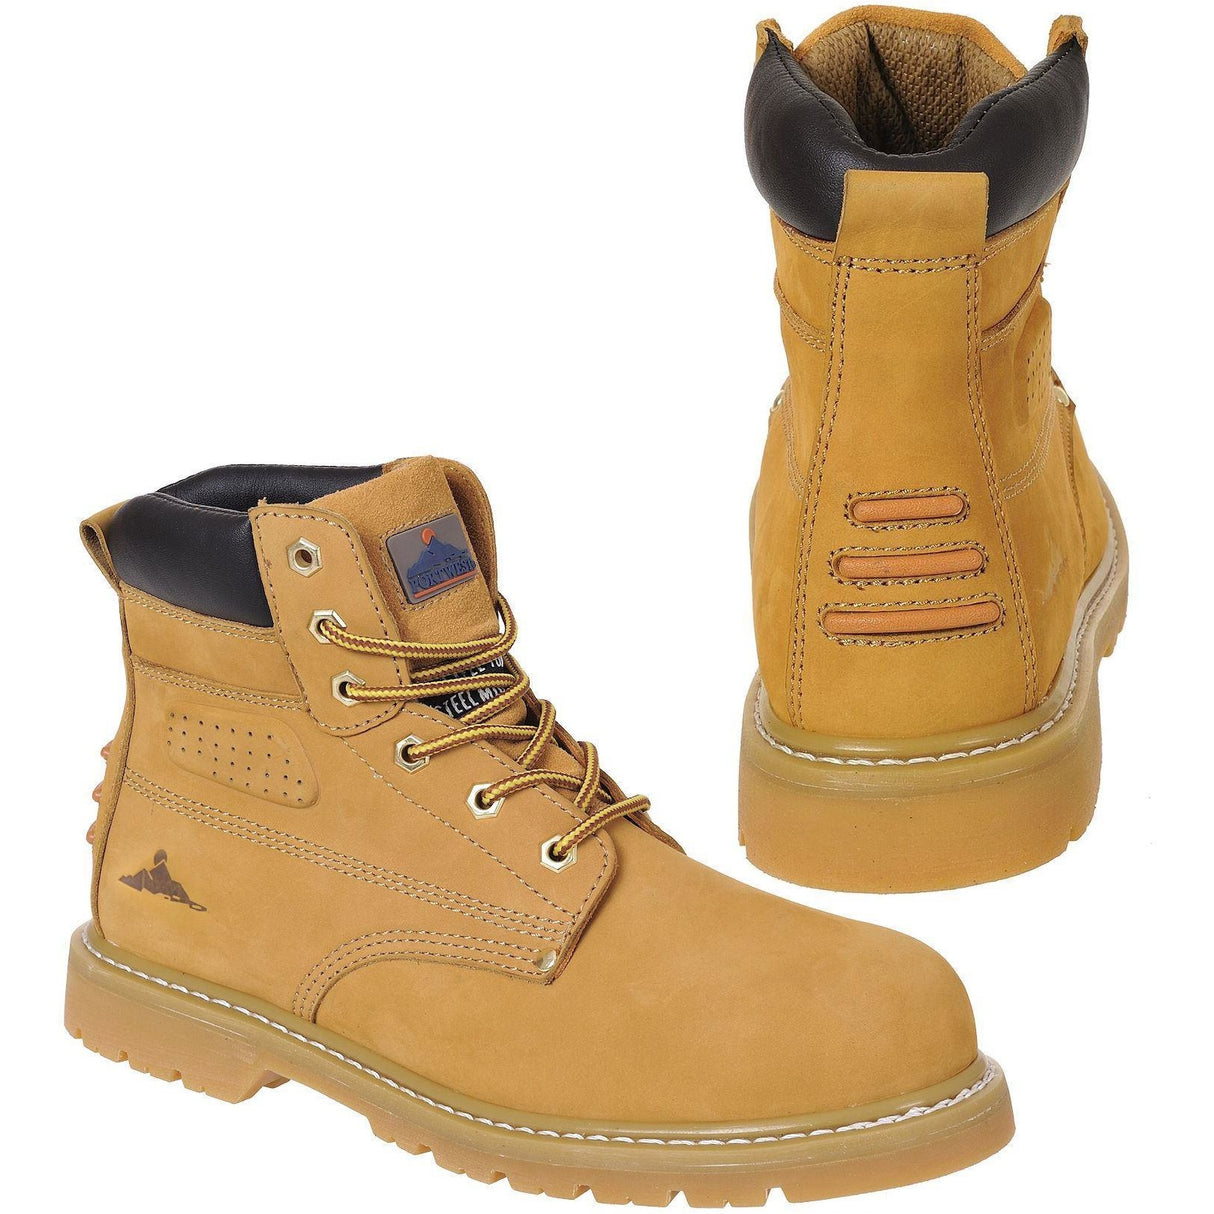 Portwest Steelite Welted Plus Safety Boot